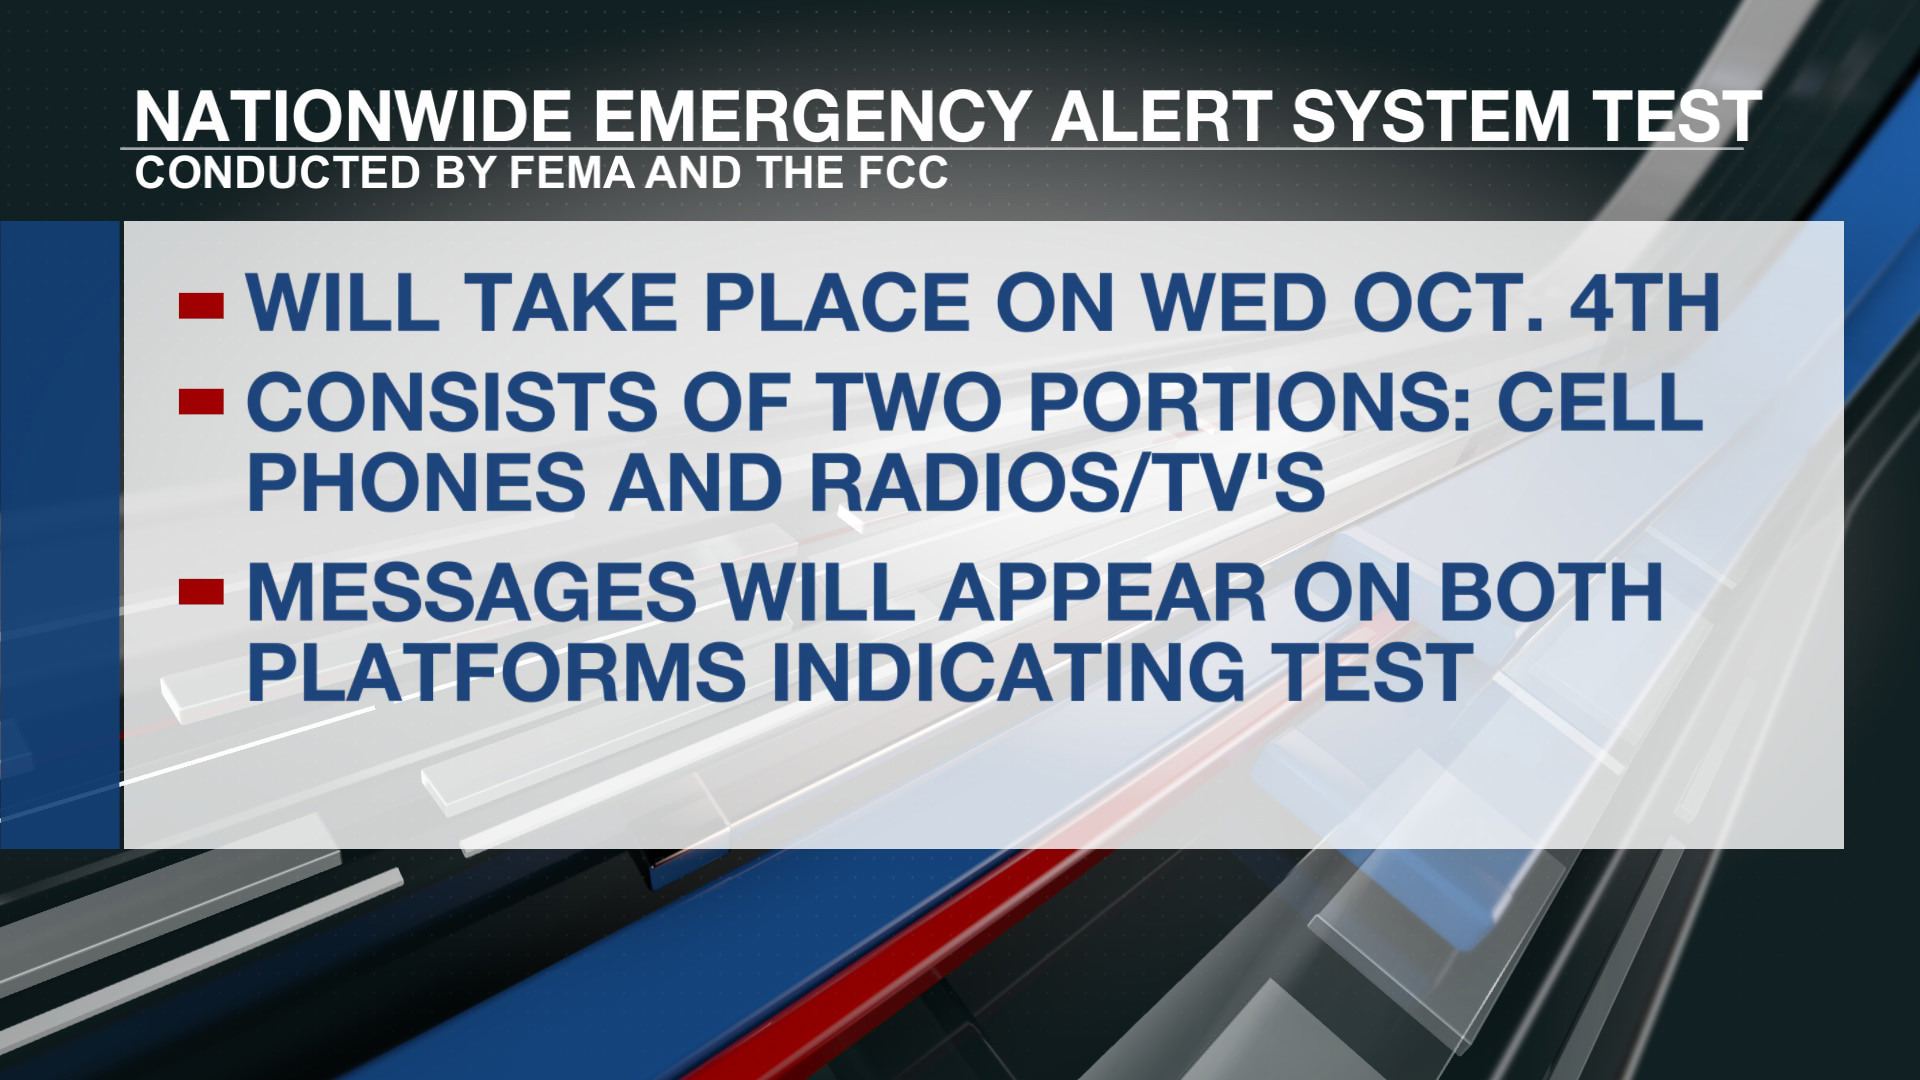 Fcc And Fema To Conduct Nationwide Emergency Alert Test